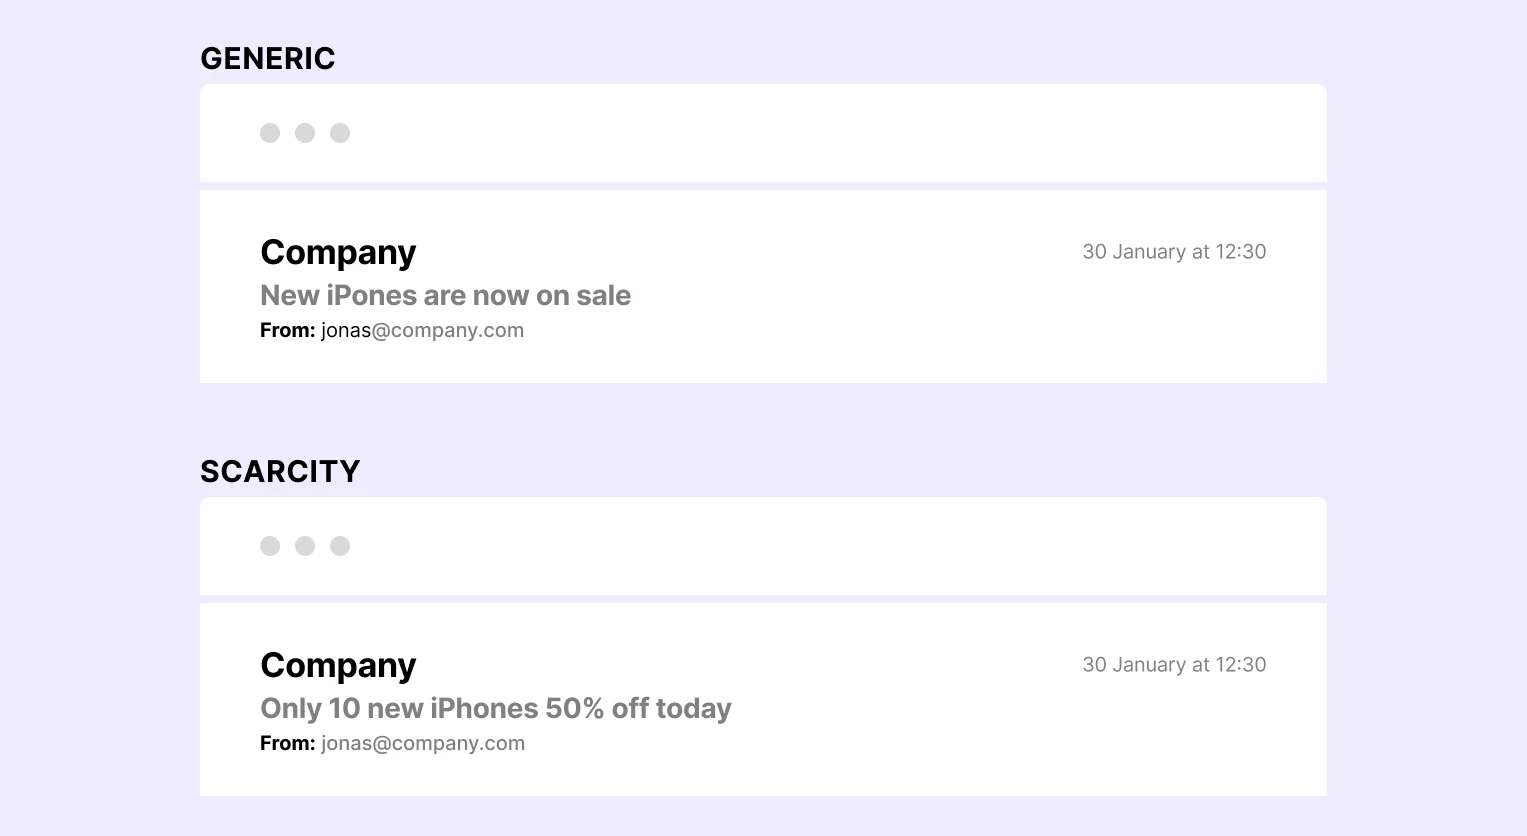 email subject line optimized for scarcity and urgency - MailerLite